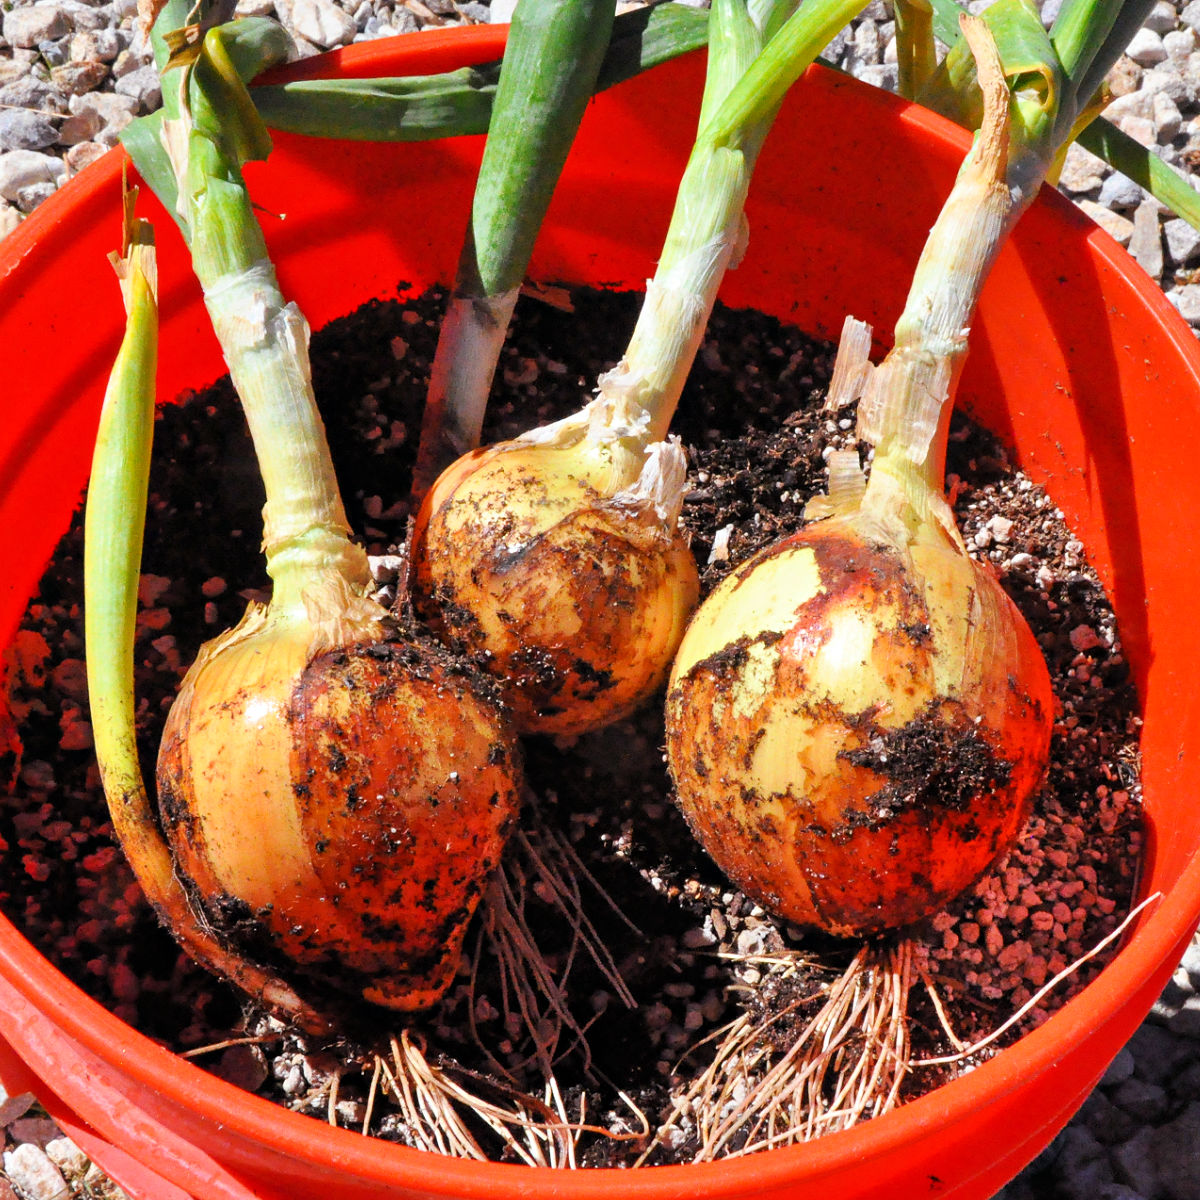 Three onions that were grown in a 5-gallon bucket from onion sprouts